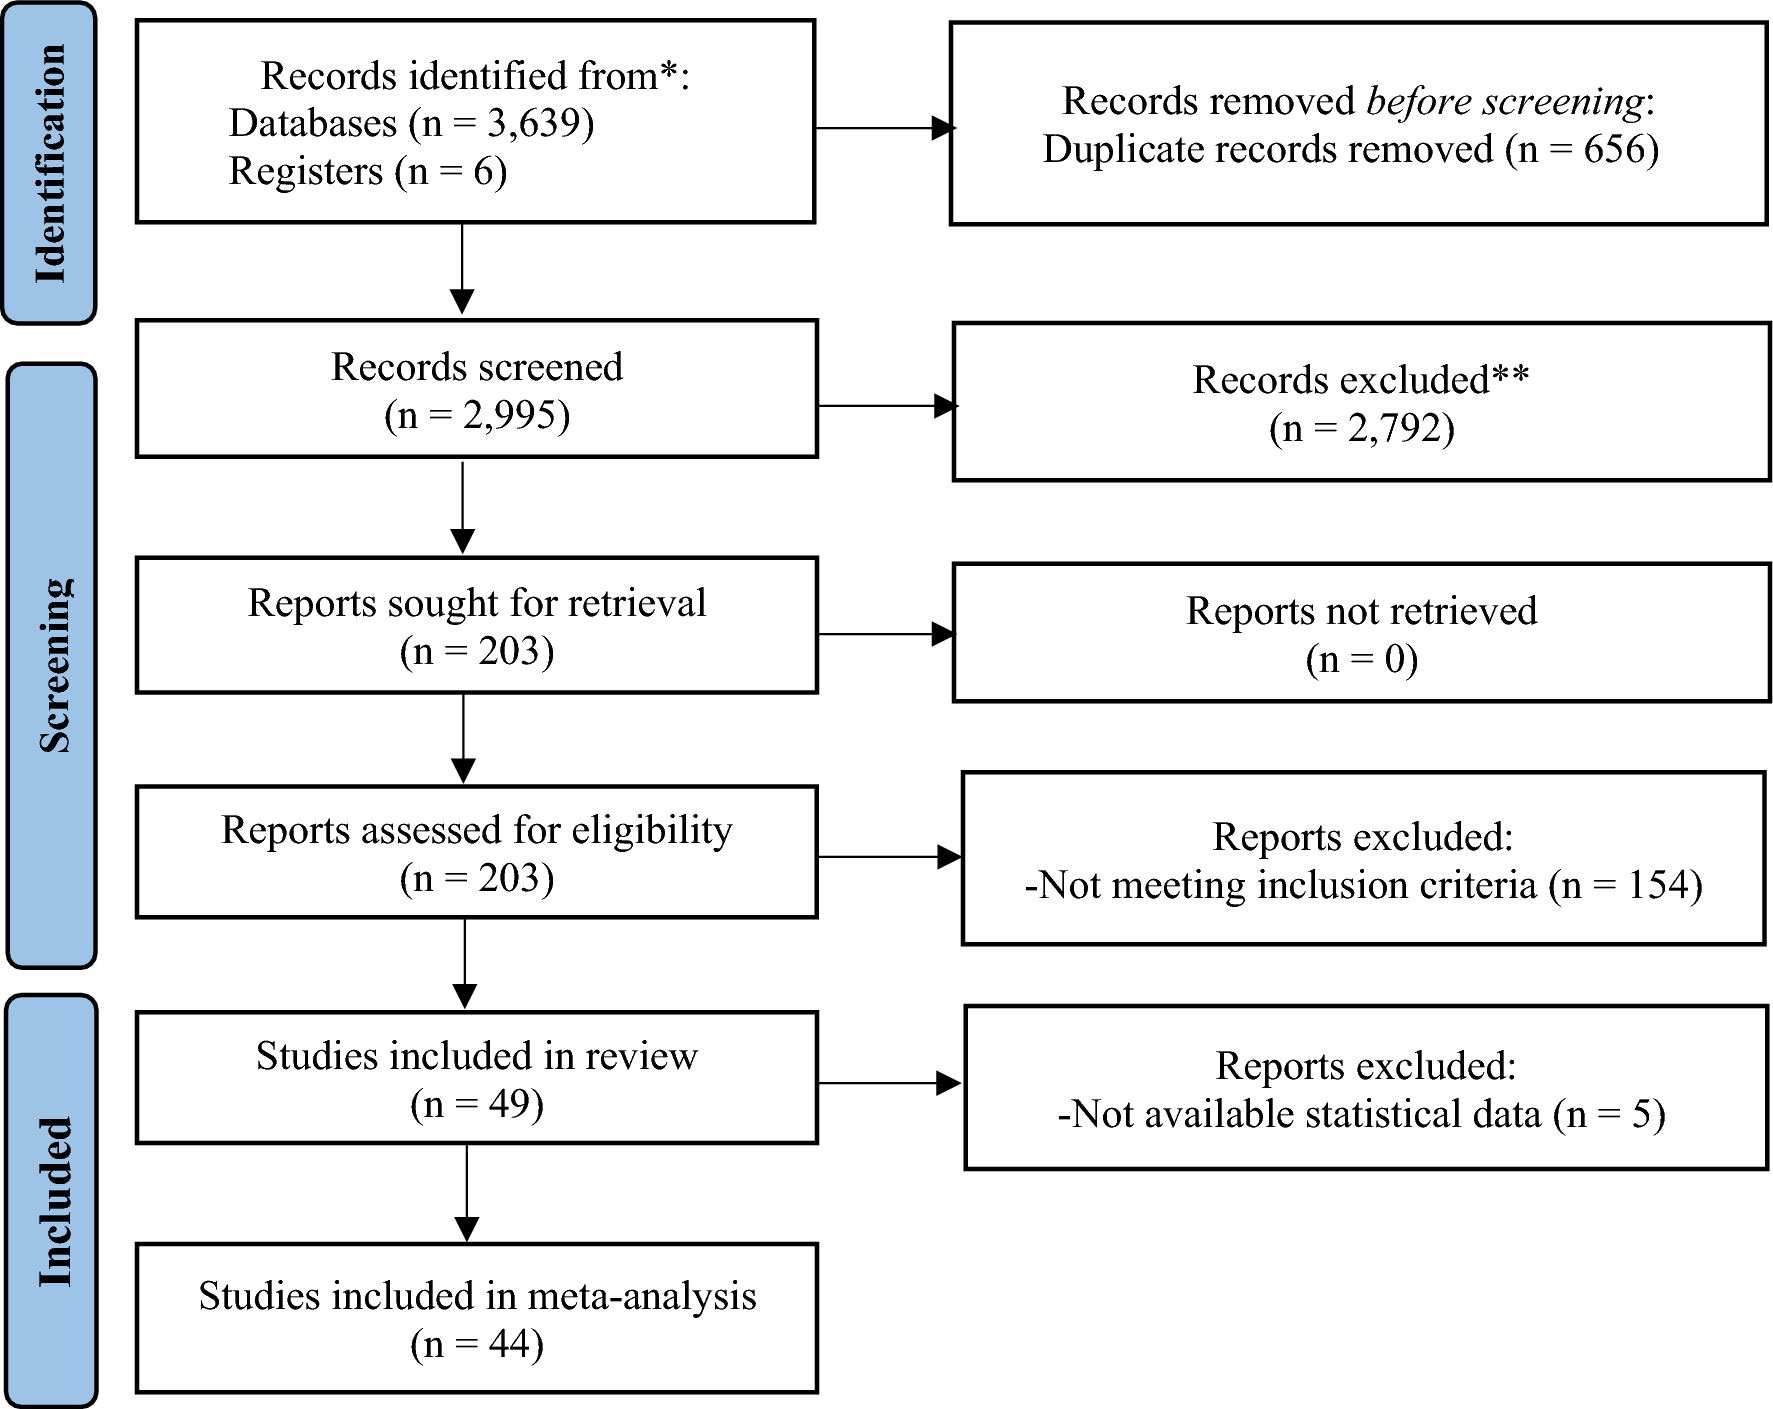 Emotional Intelligence and Gaming Disorder Symptomatology: A Systematic Review and Meta-Analysis